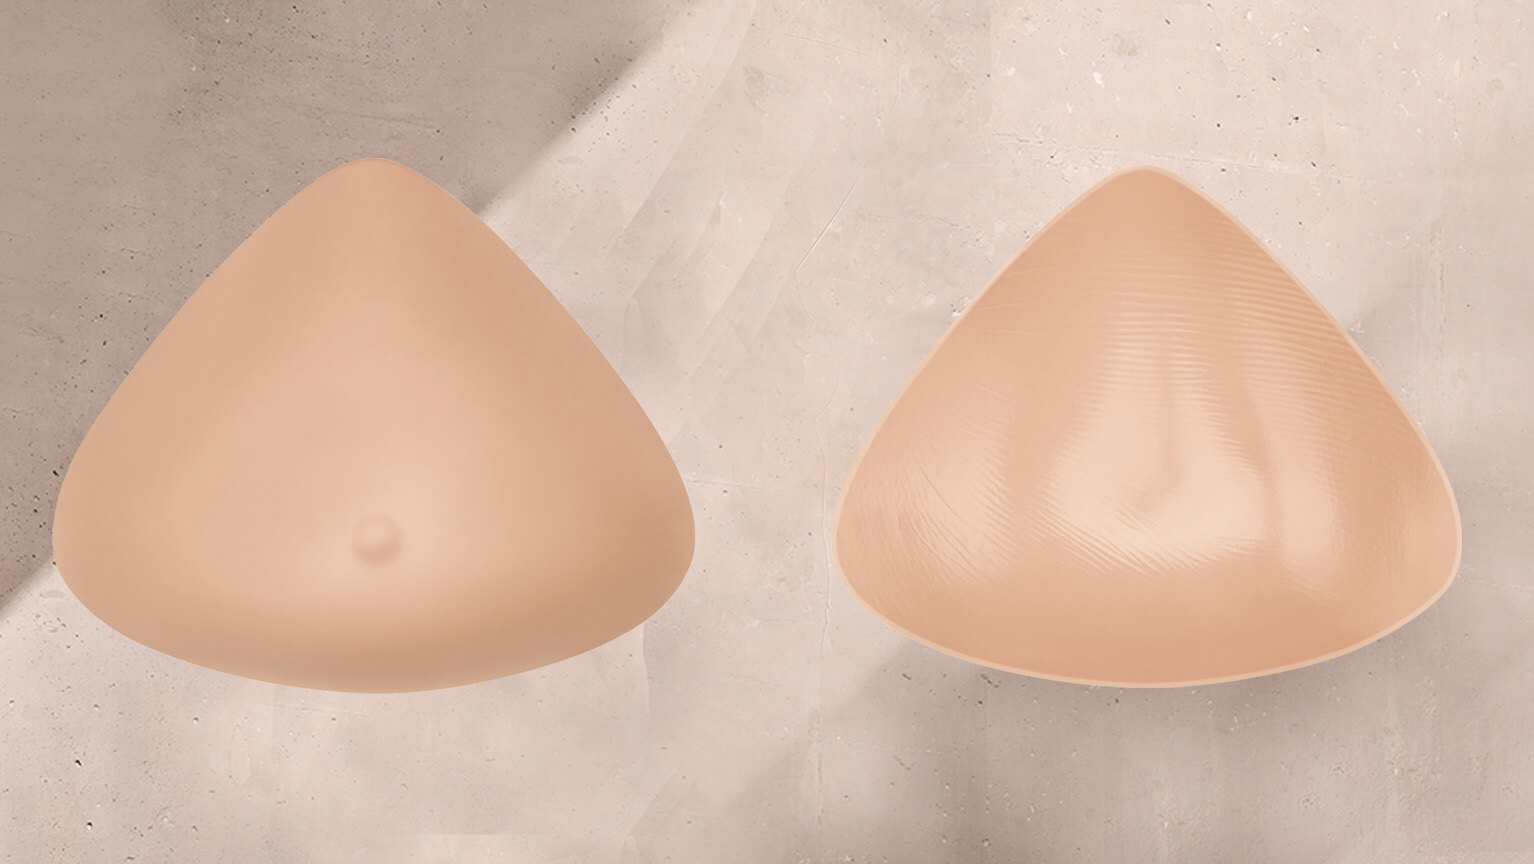 https://www.amoena.com/Images/CategoryMobile/mobile-category-amoena-breast-forms-essential.jpg